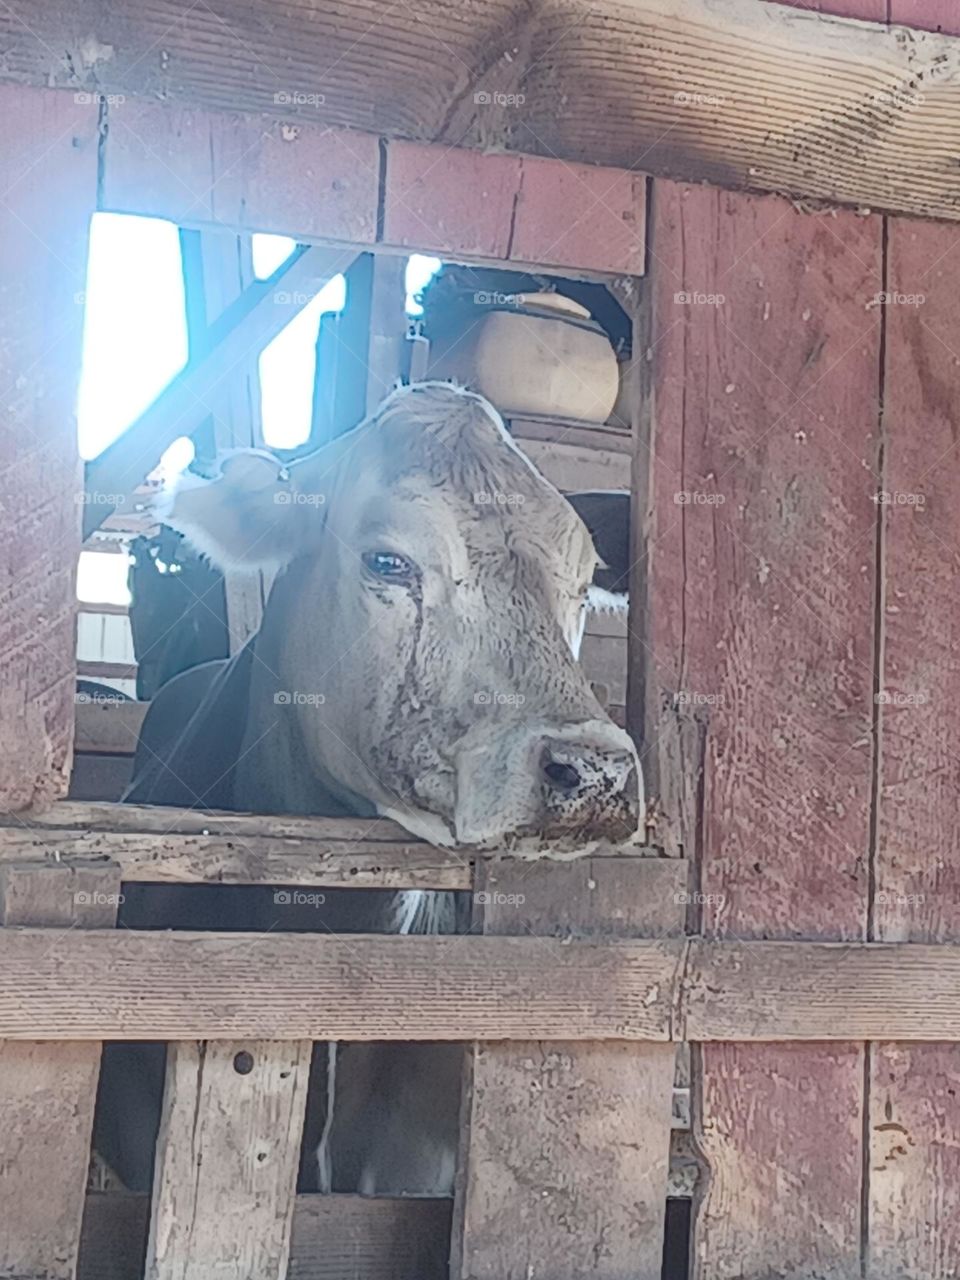 Coconut, the cow, looks out of the old barn window.  Coconut was a good friend.  I am still angry that I was obliged to send her away.  I pray that she is happy and safe.  I wonder if she thinks of me.